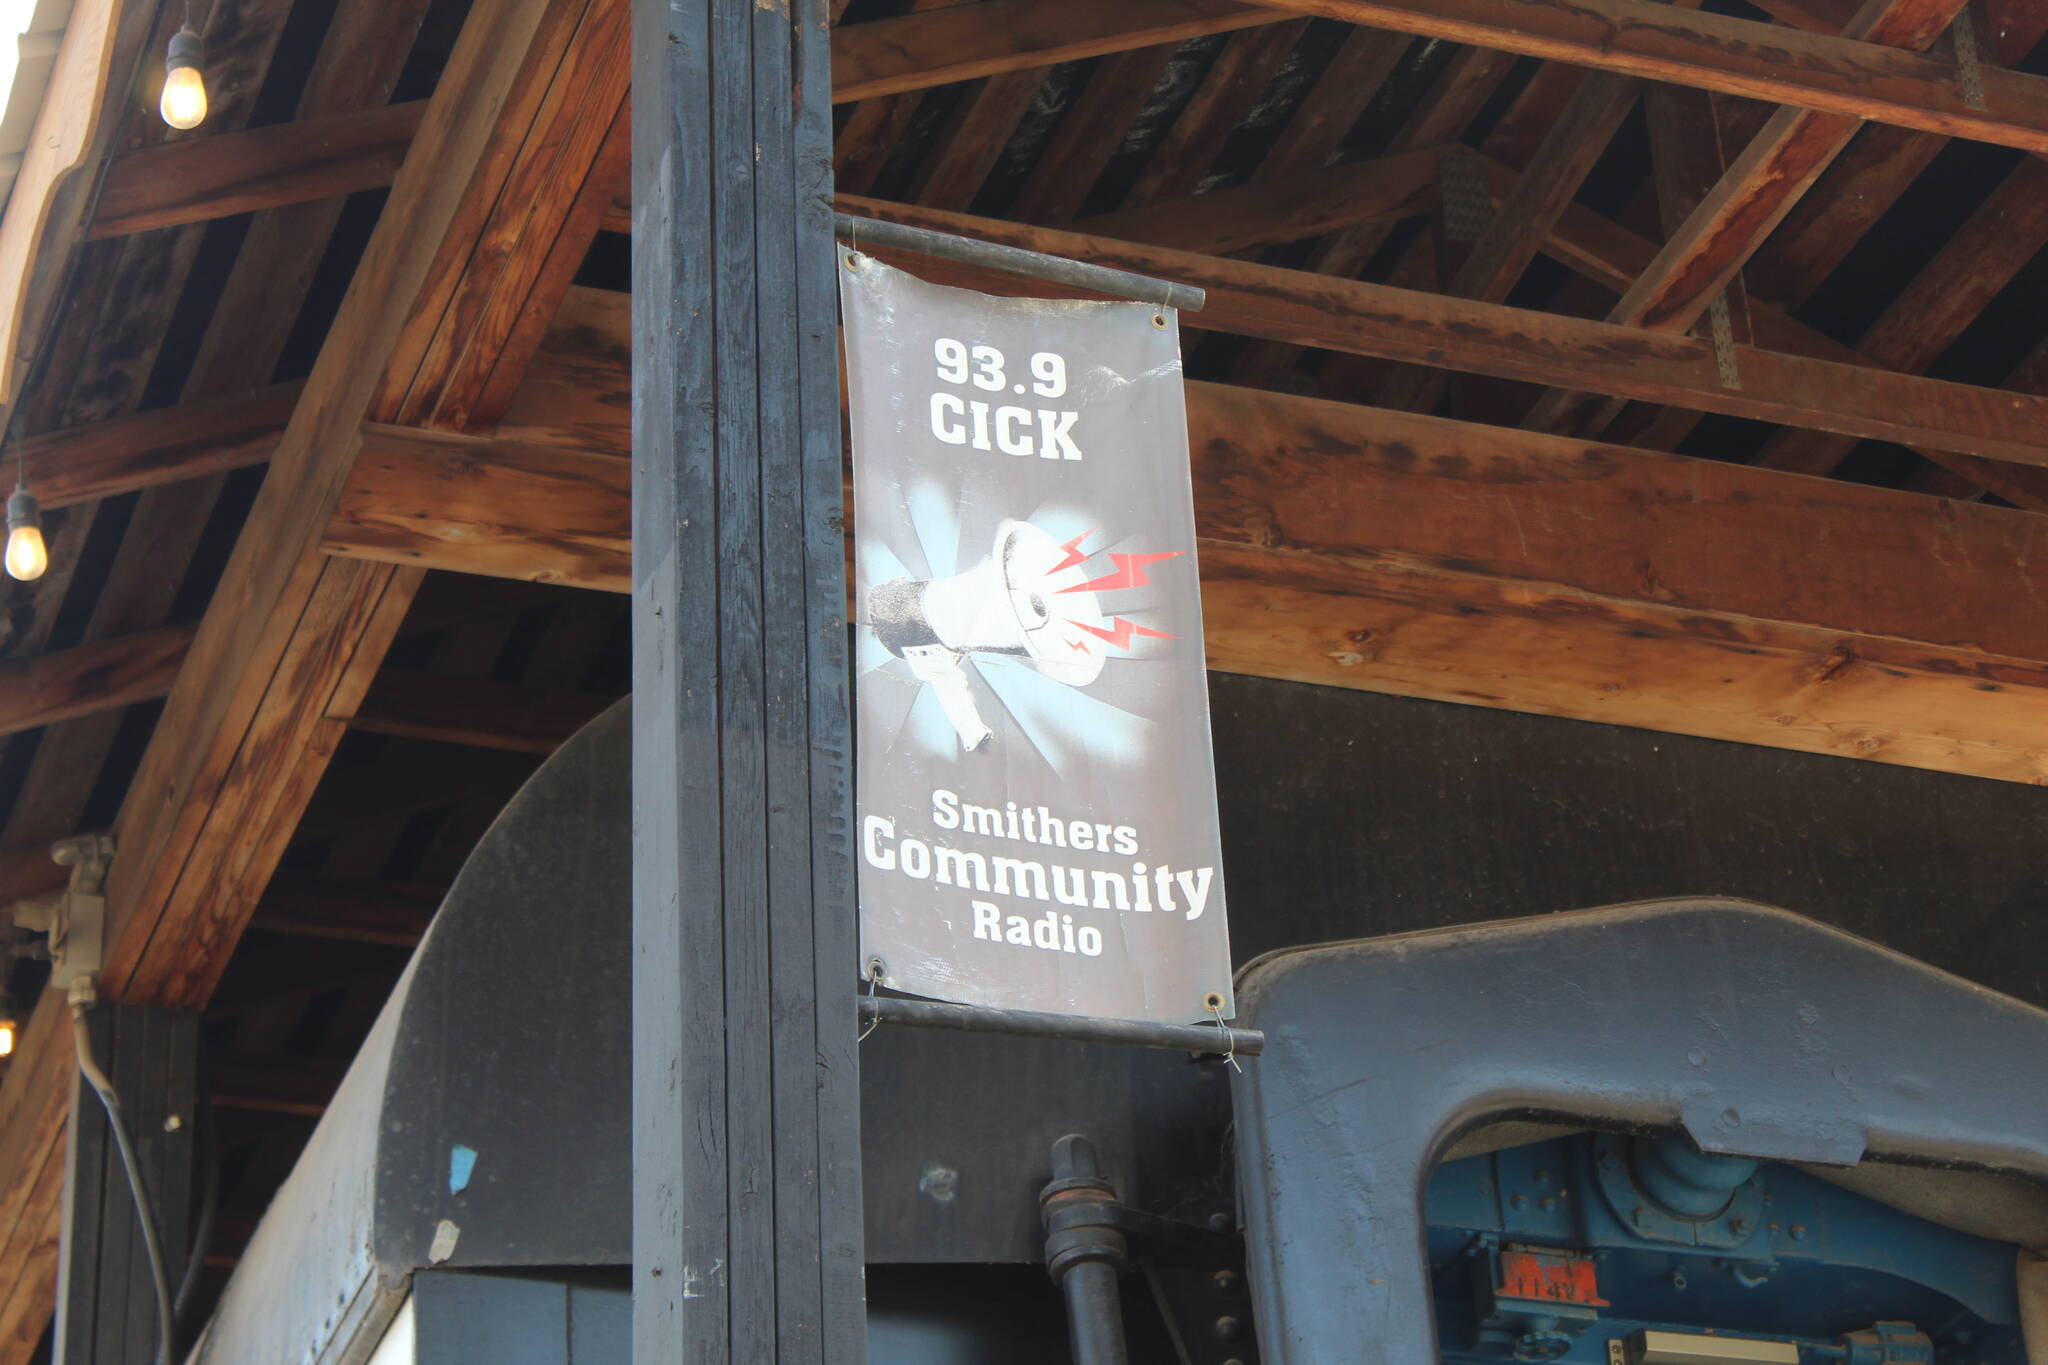 32688478_web1_230518-SIN-OURTOWN-CICK-sign_1